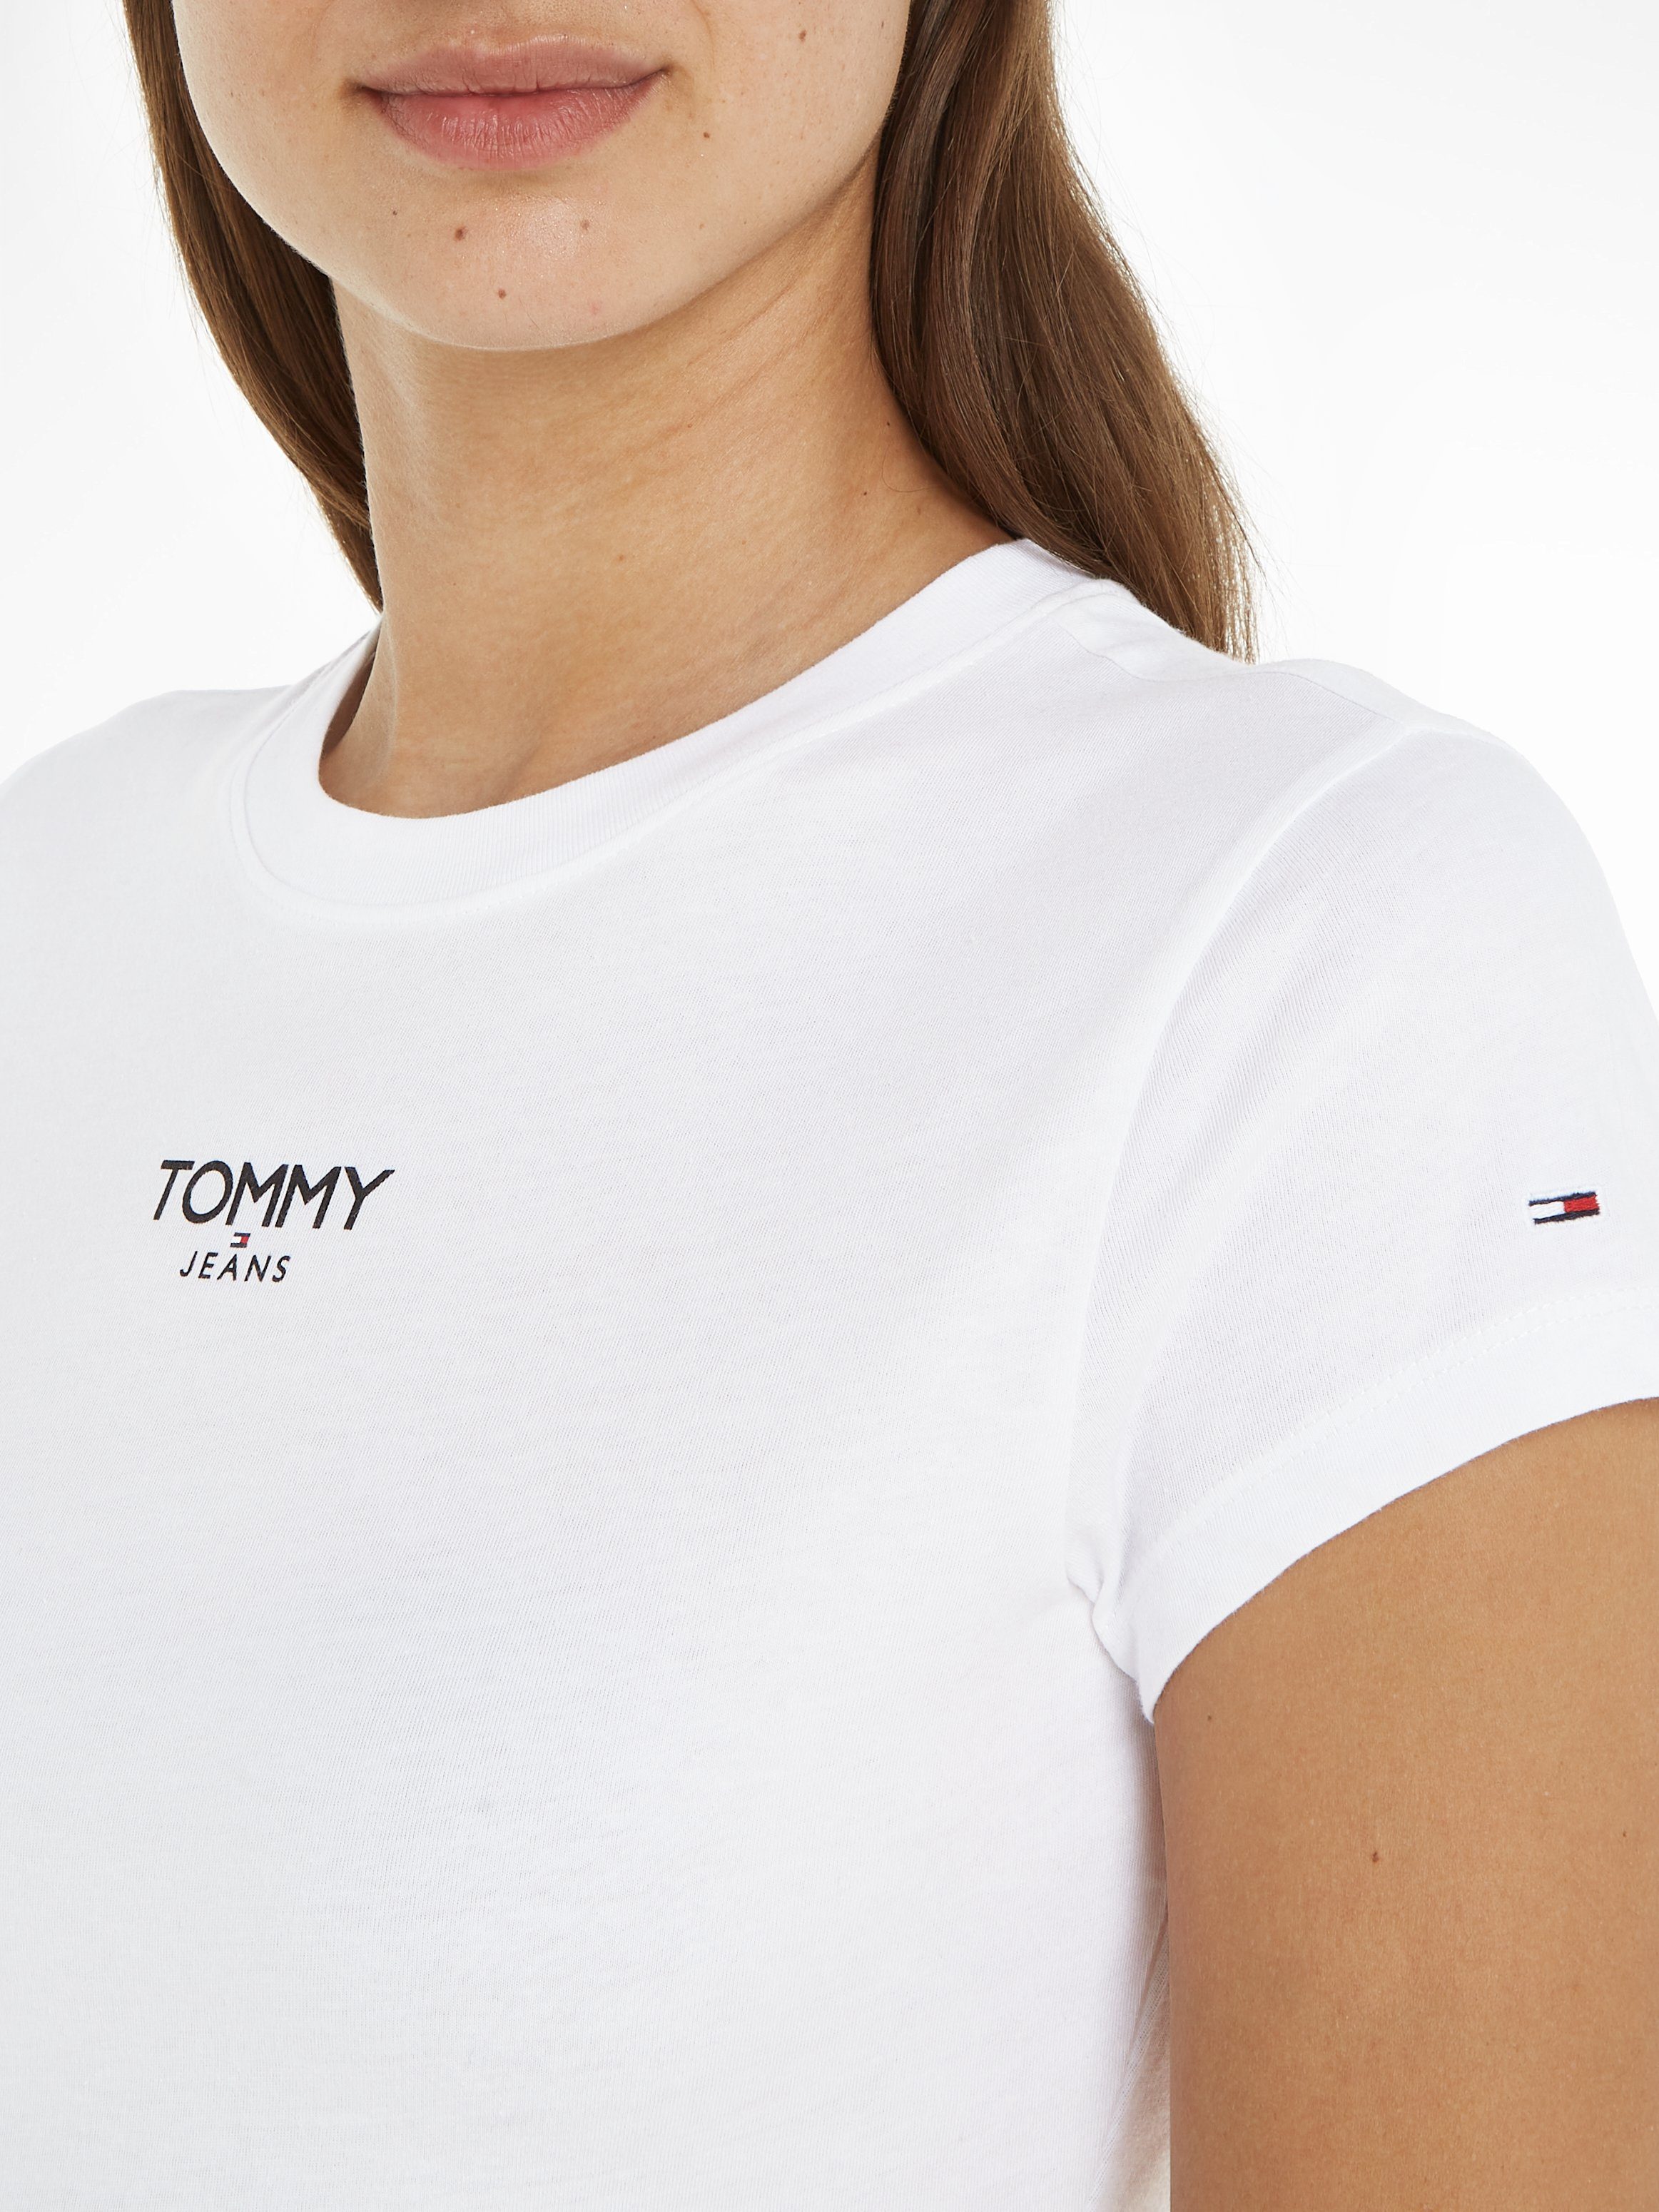 Tommy Jeans T-Shirt Jeans Tommy SS 1 mit BBY Logo White LOGO TJW ESSENTIAL